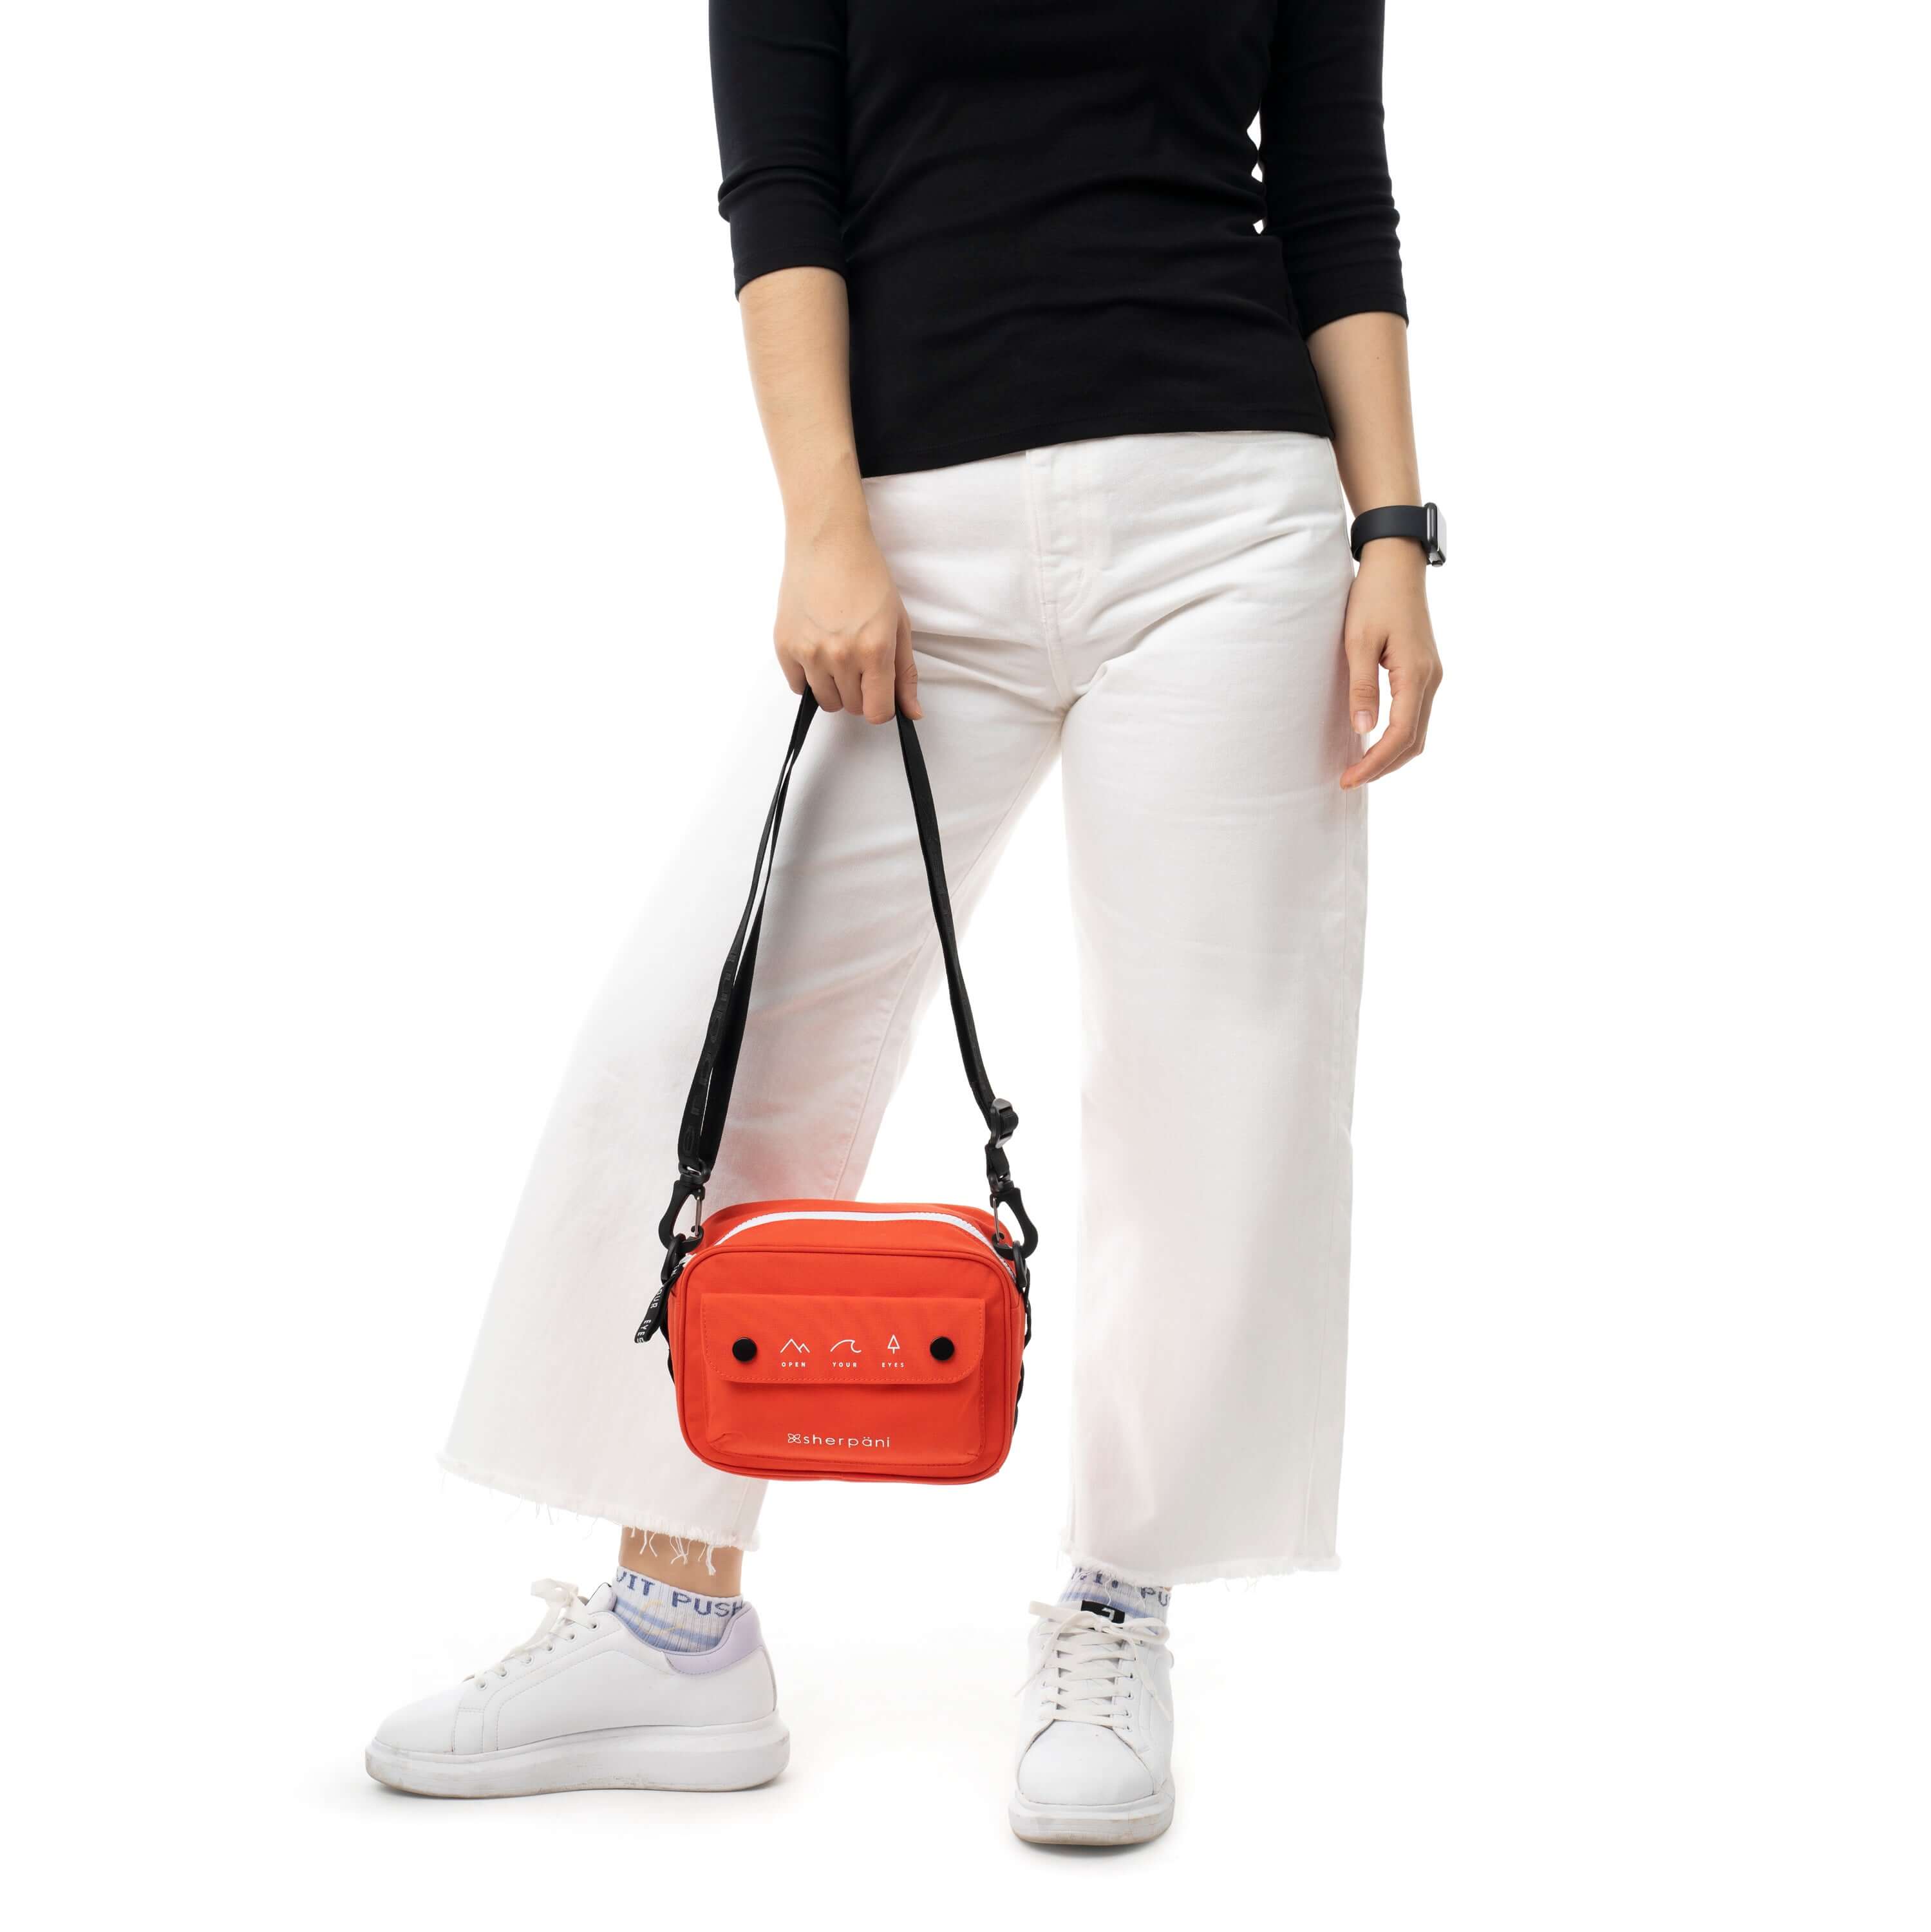 Close up view of a model facing the camera. She is wearing a black shirt, white pants and white sneakers. She carries Sherpani crossbody, the Osaka in Poppy, by the adjustable/detachable crossbody strap.